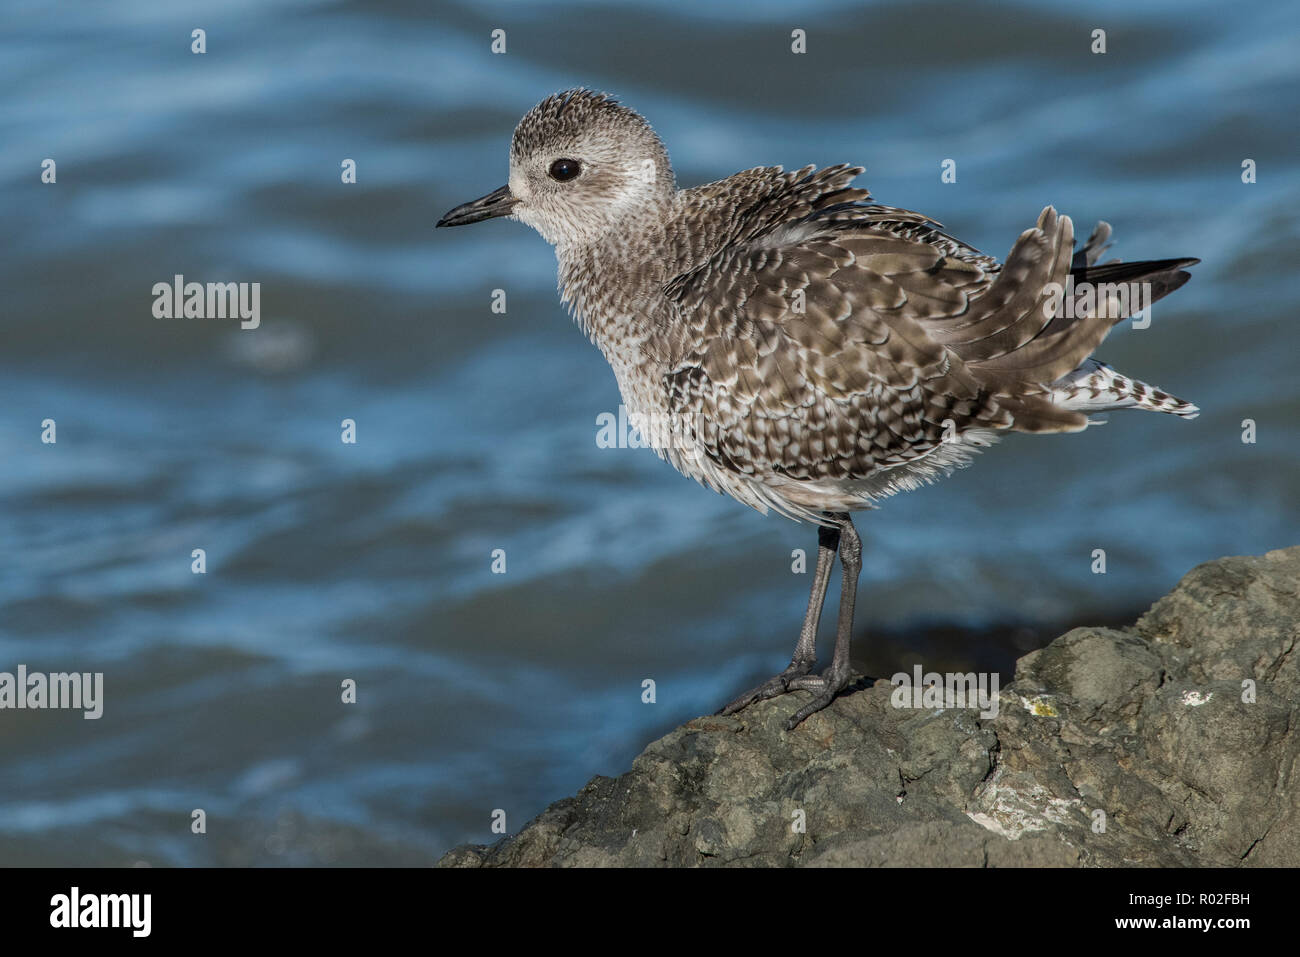 A black bellied plover also known as a grey plover (Pluvialis squatarola) with winter plumage photographed late October in the San Francisco bay. Stock Photo